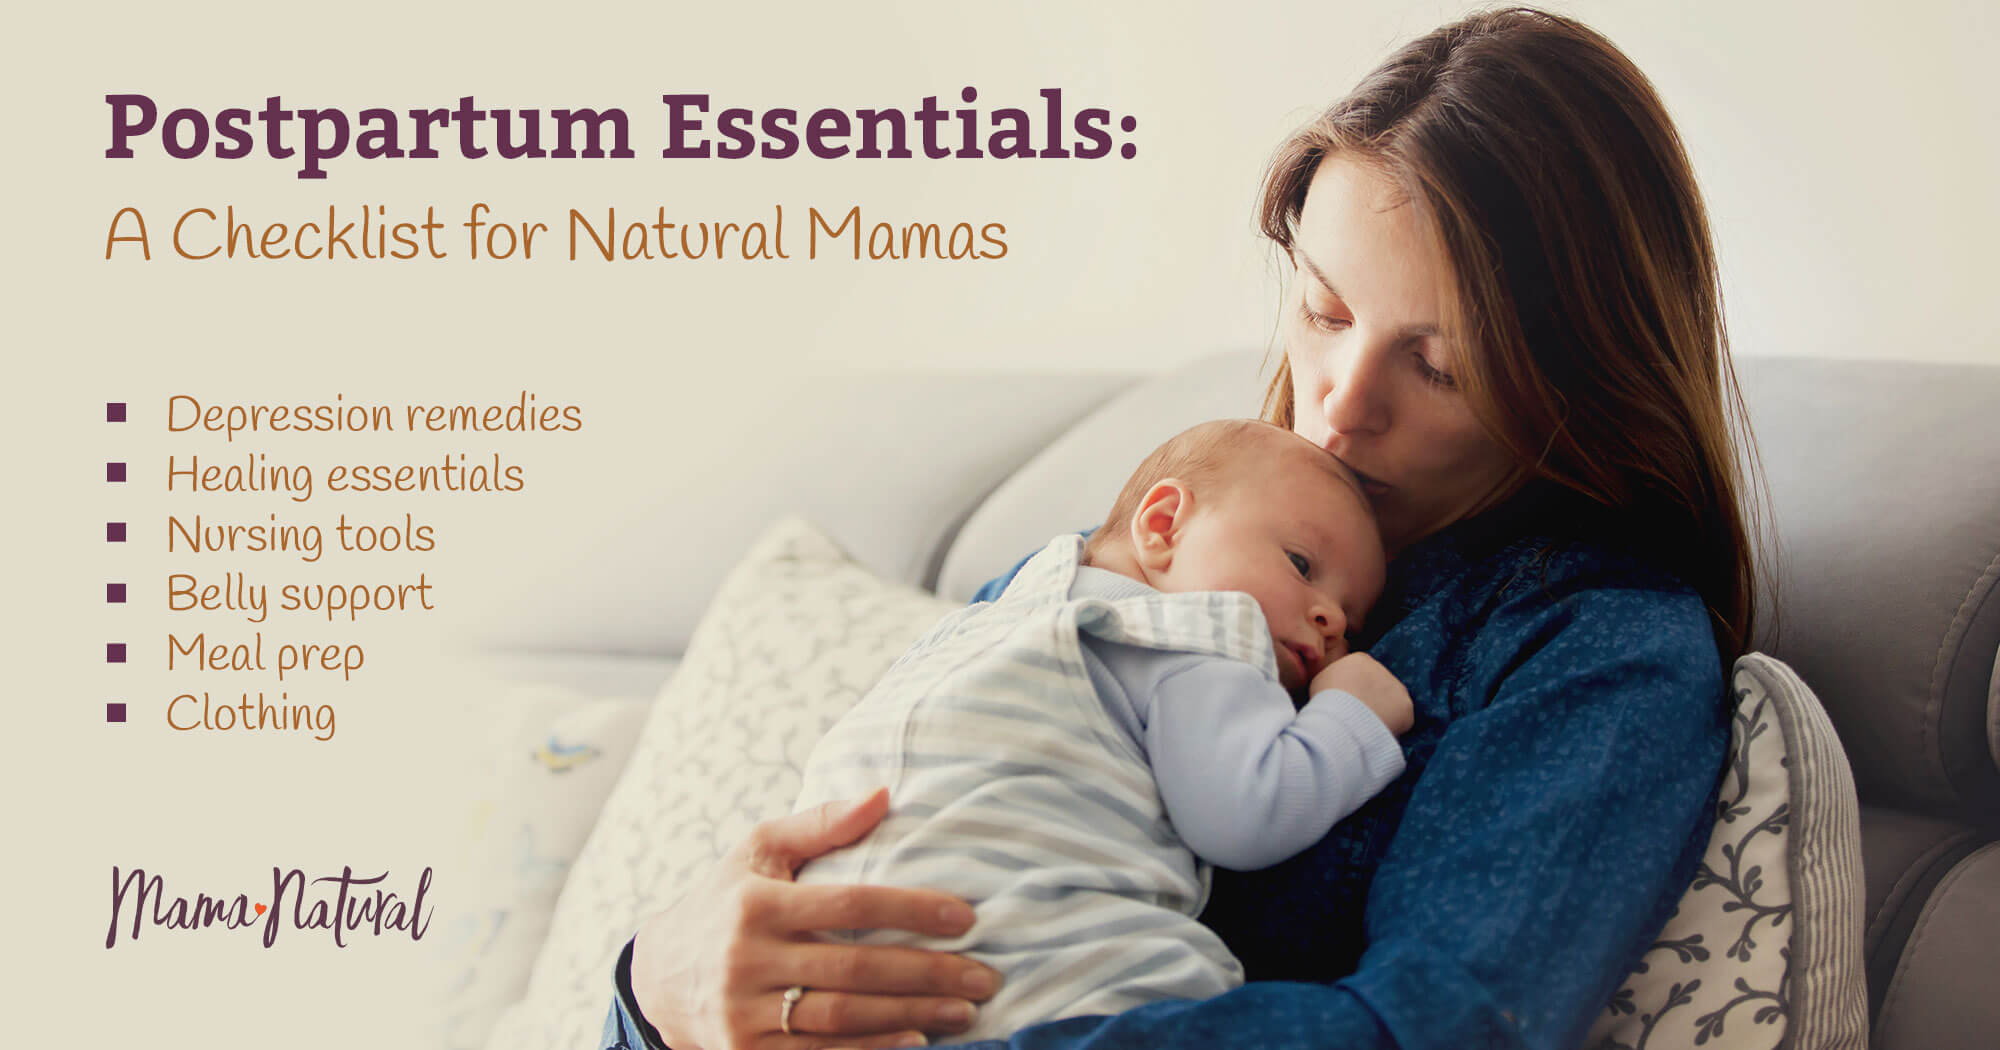 My Top 10 Natural Pregnancy and Postpartum Essentials - Bumblebee Apothecary